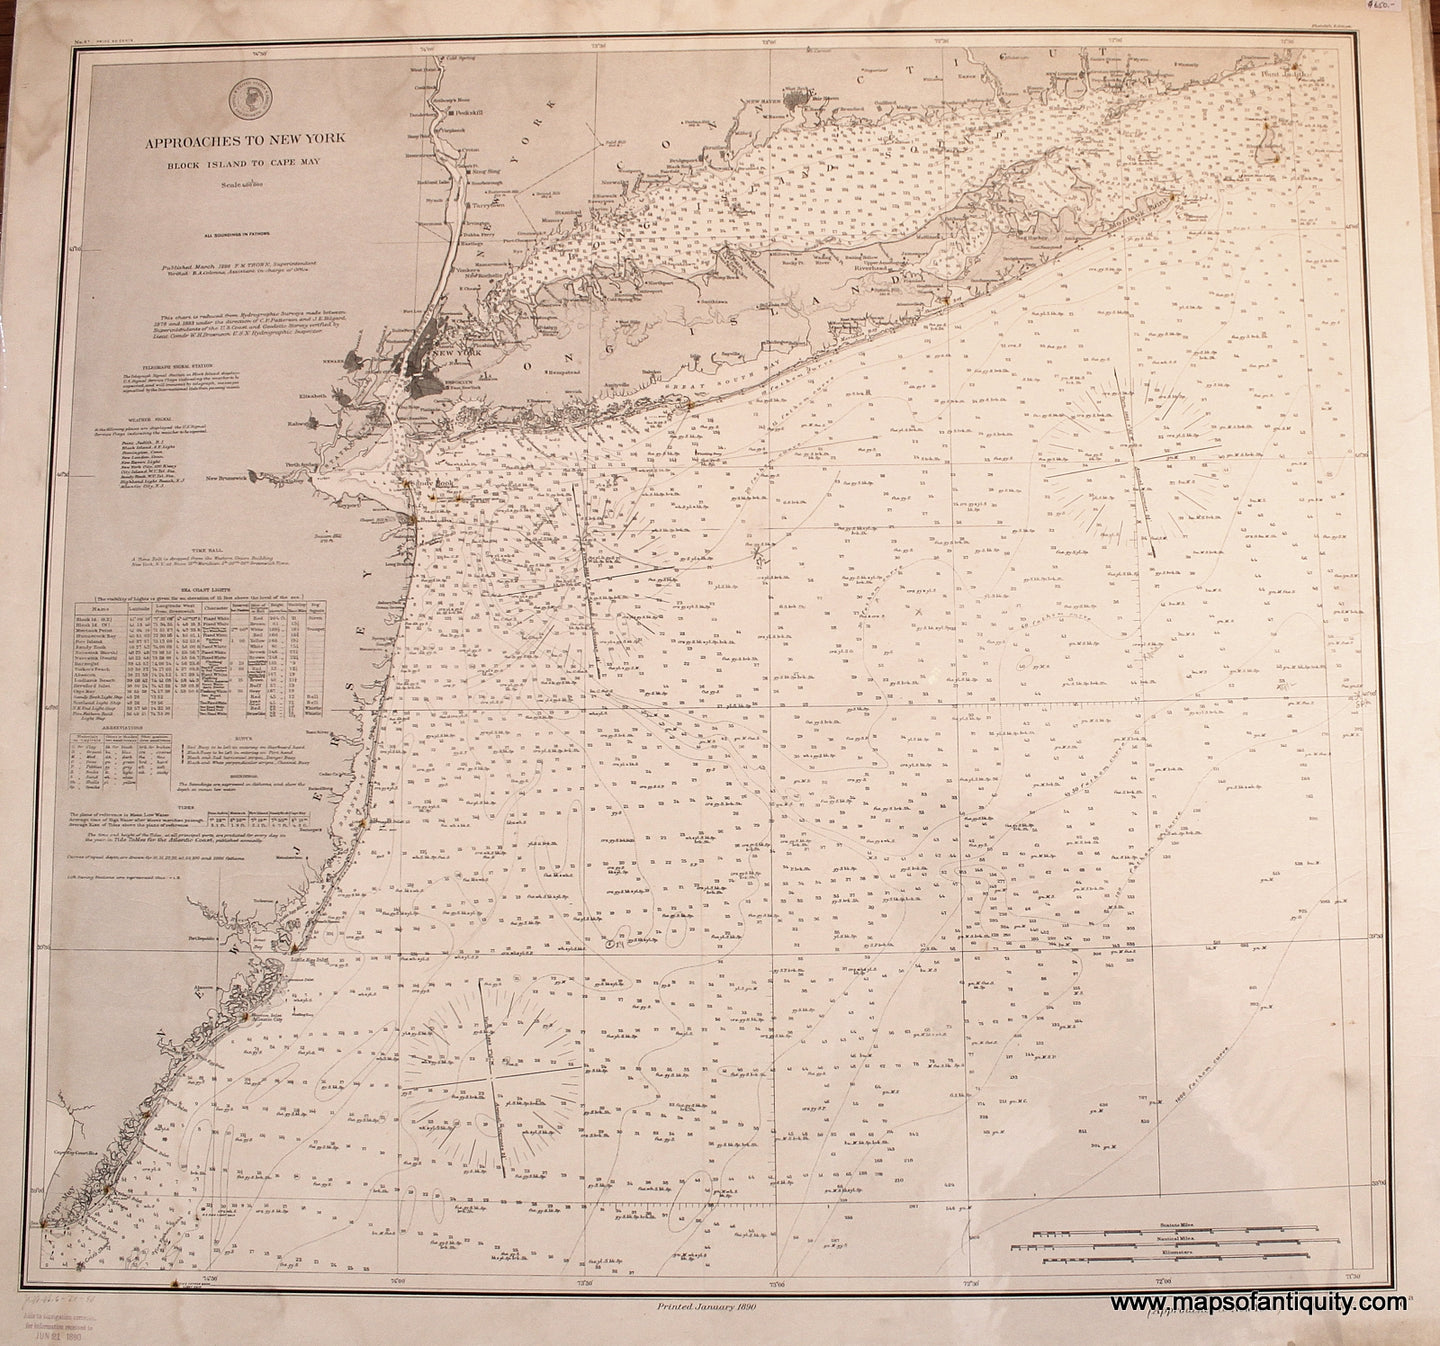 Black-&-white-Antique-Nautical-Chart-Approaches-to-New-York-Block-Island-to-Cape-May-****-United-States-Northeast-1886-U.S.-Coast-&-Geodetic-Survey-Maps-Of-Antiquity